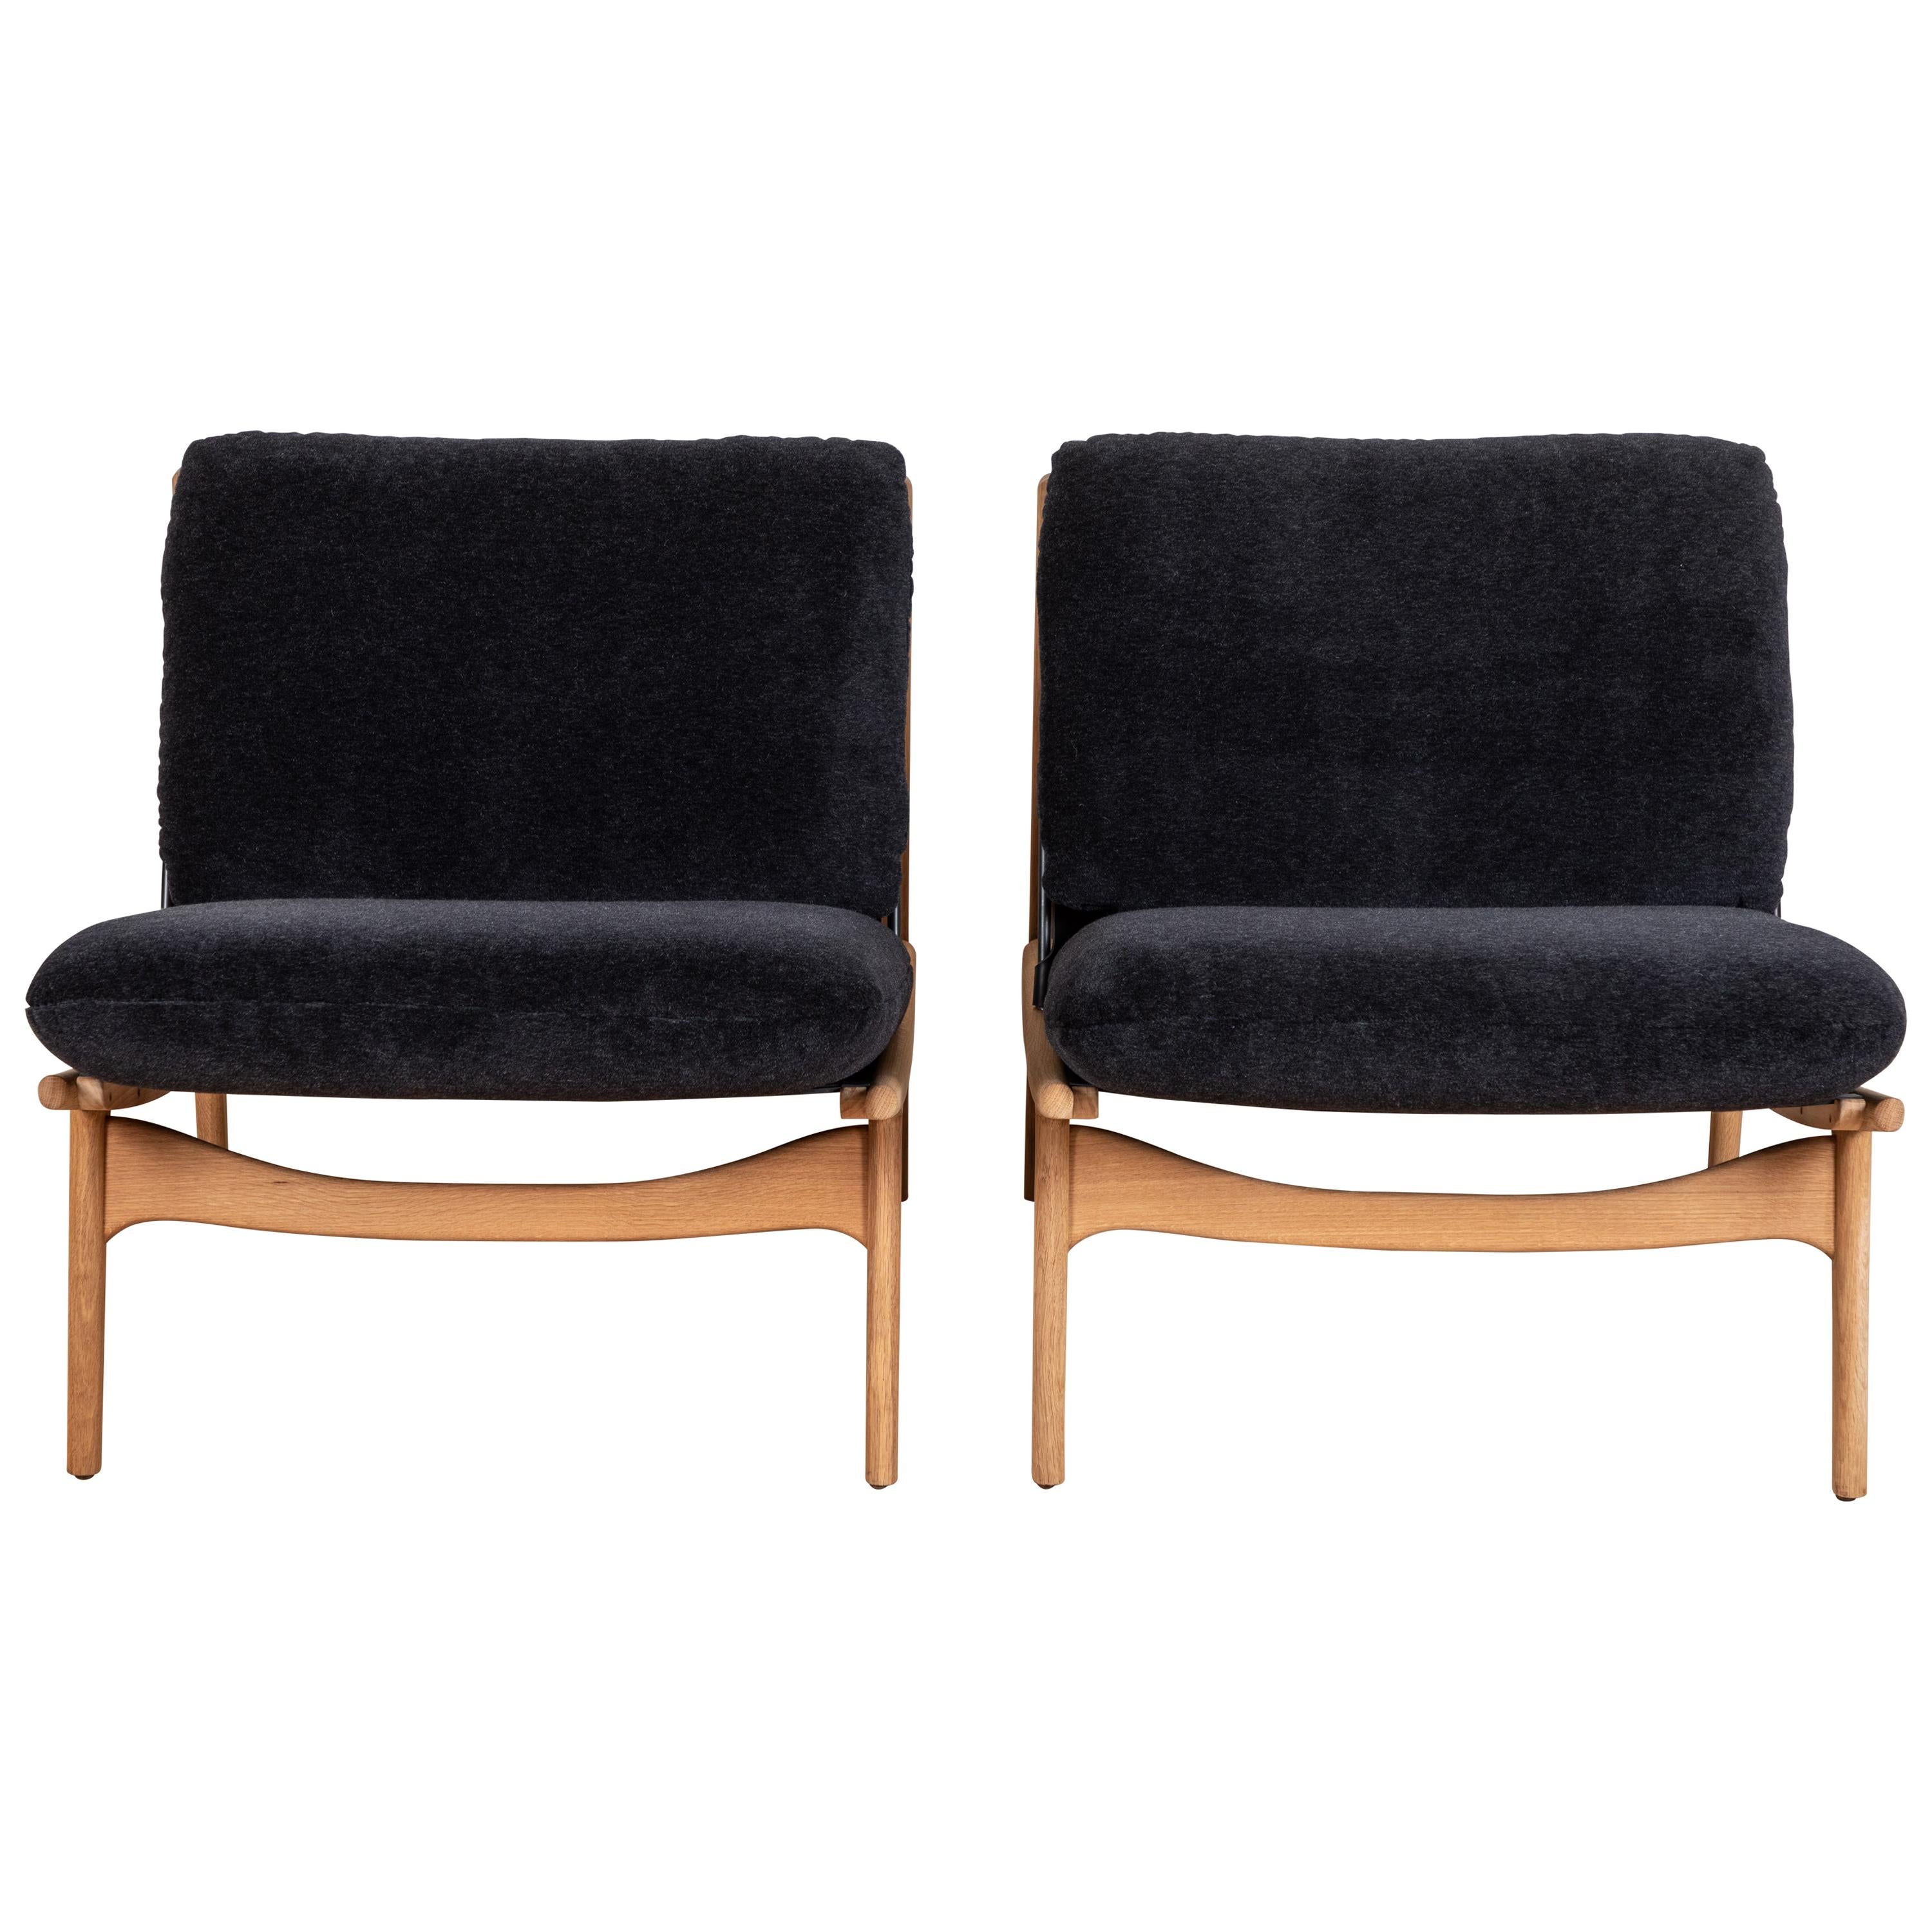 Pair of Maker's Lounge Chairs by Lawson-Fenning